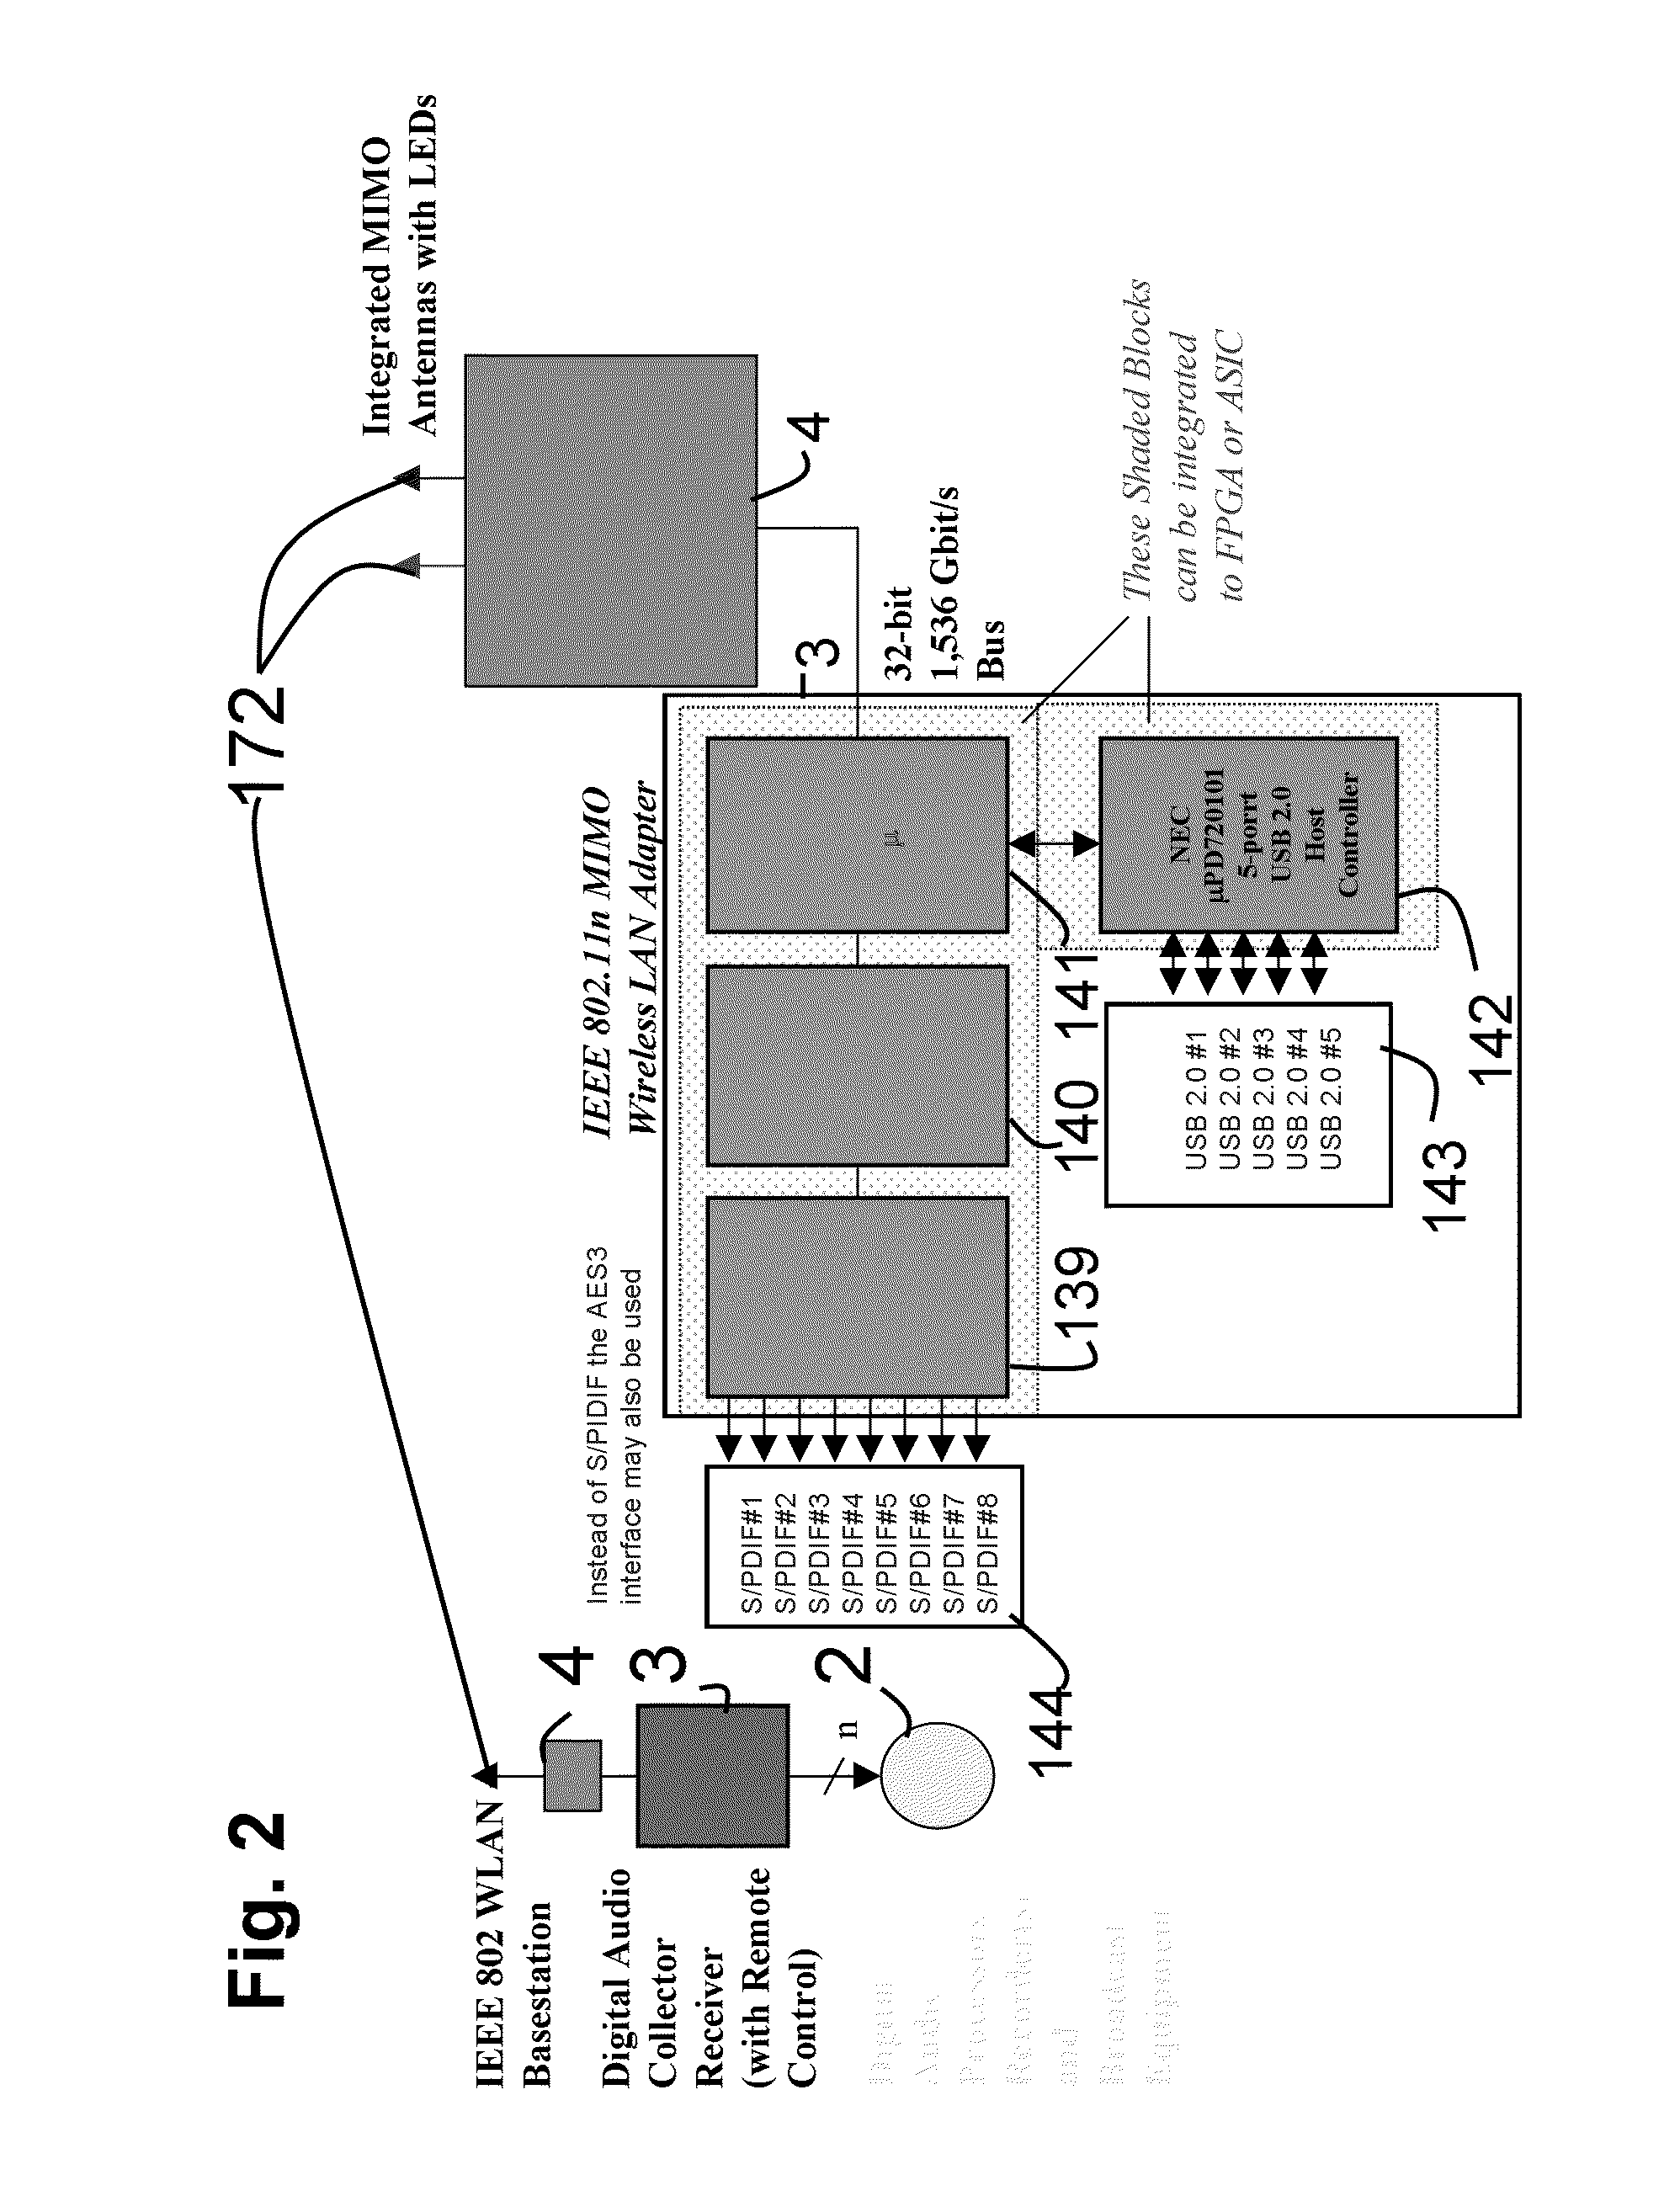 Method and system for wireless real-time collection of multichannel digital audio